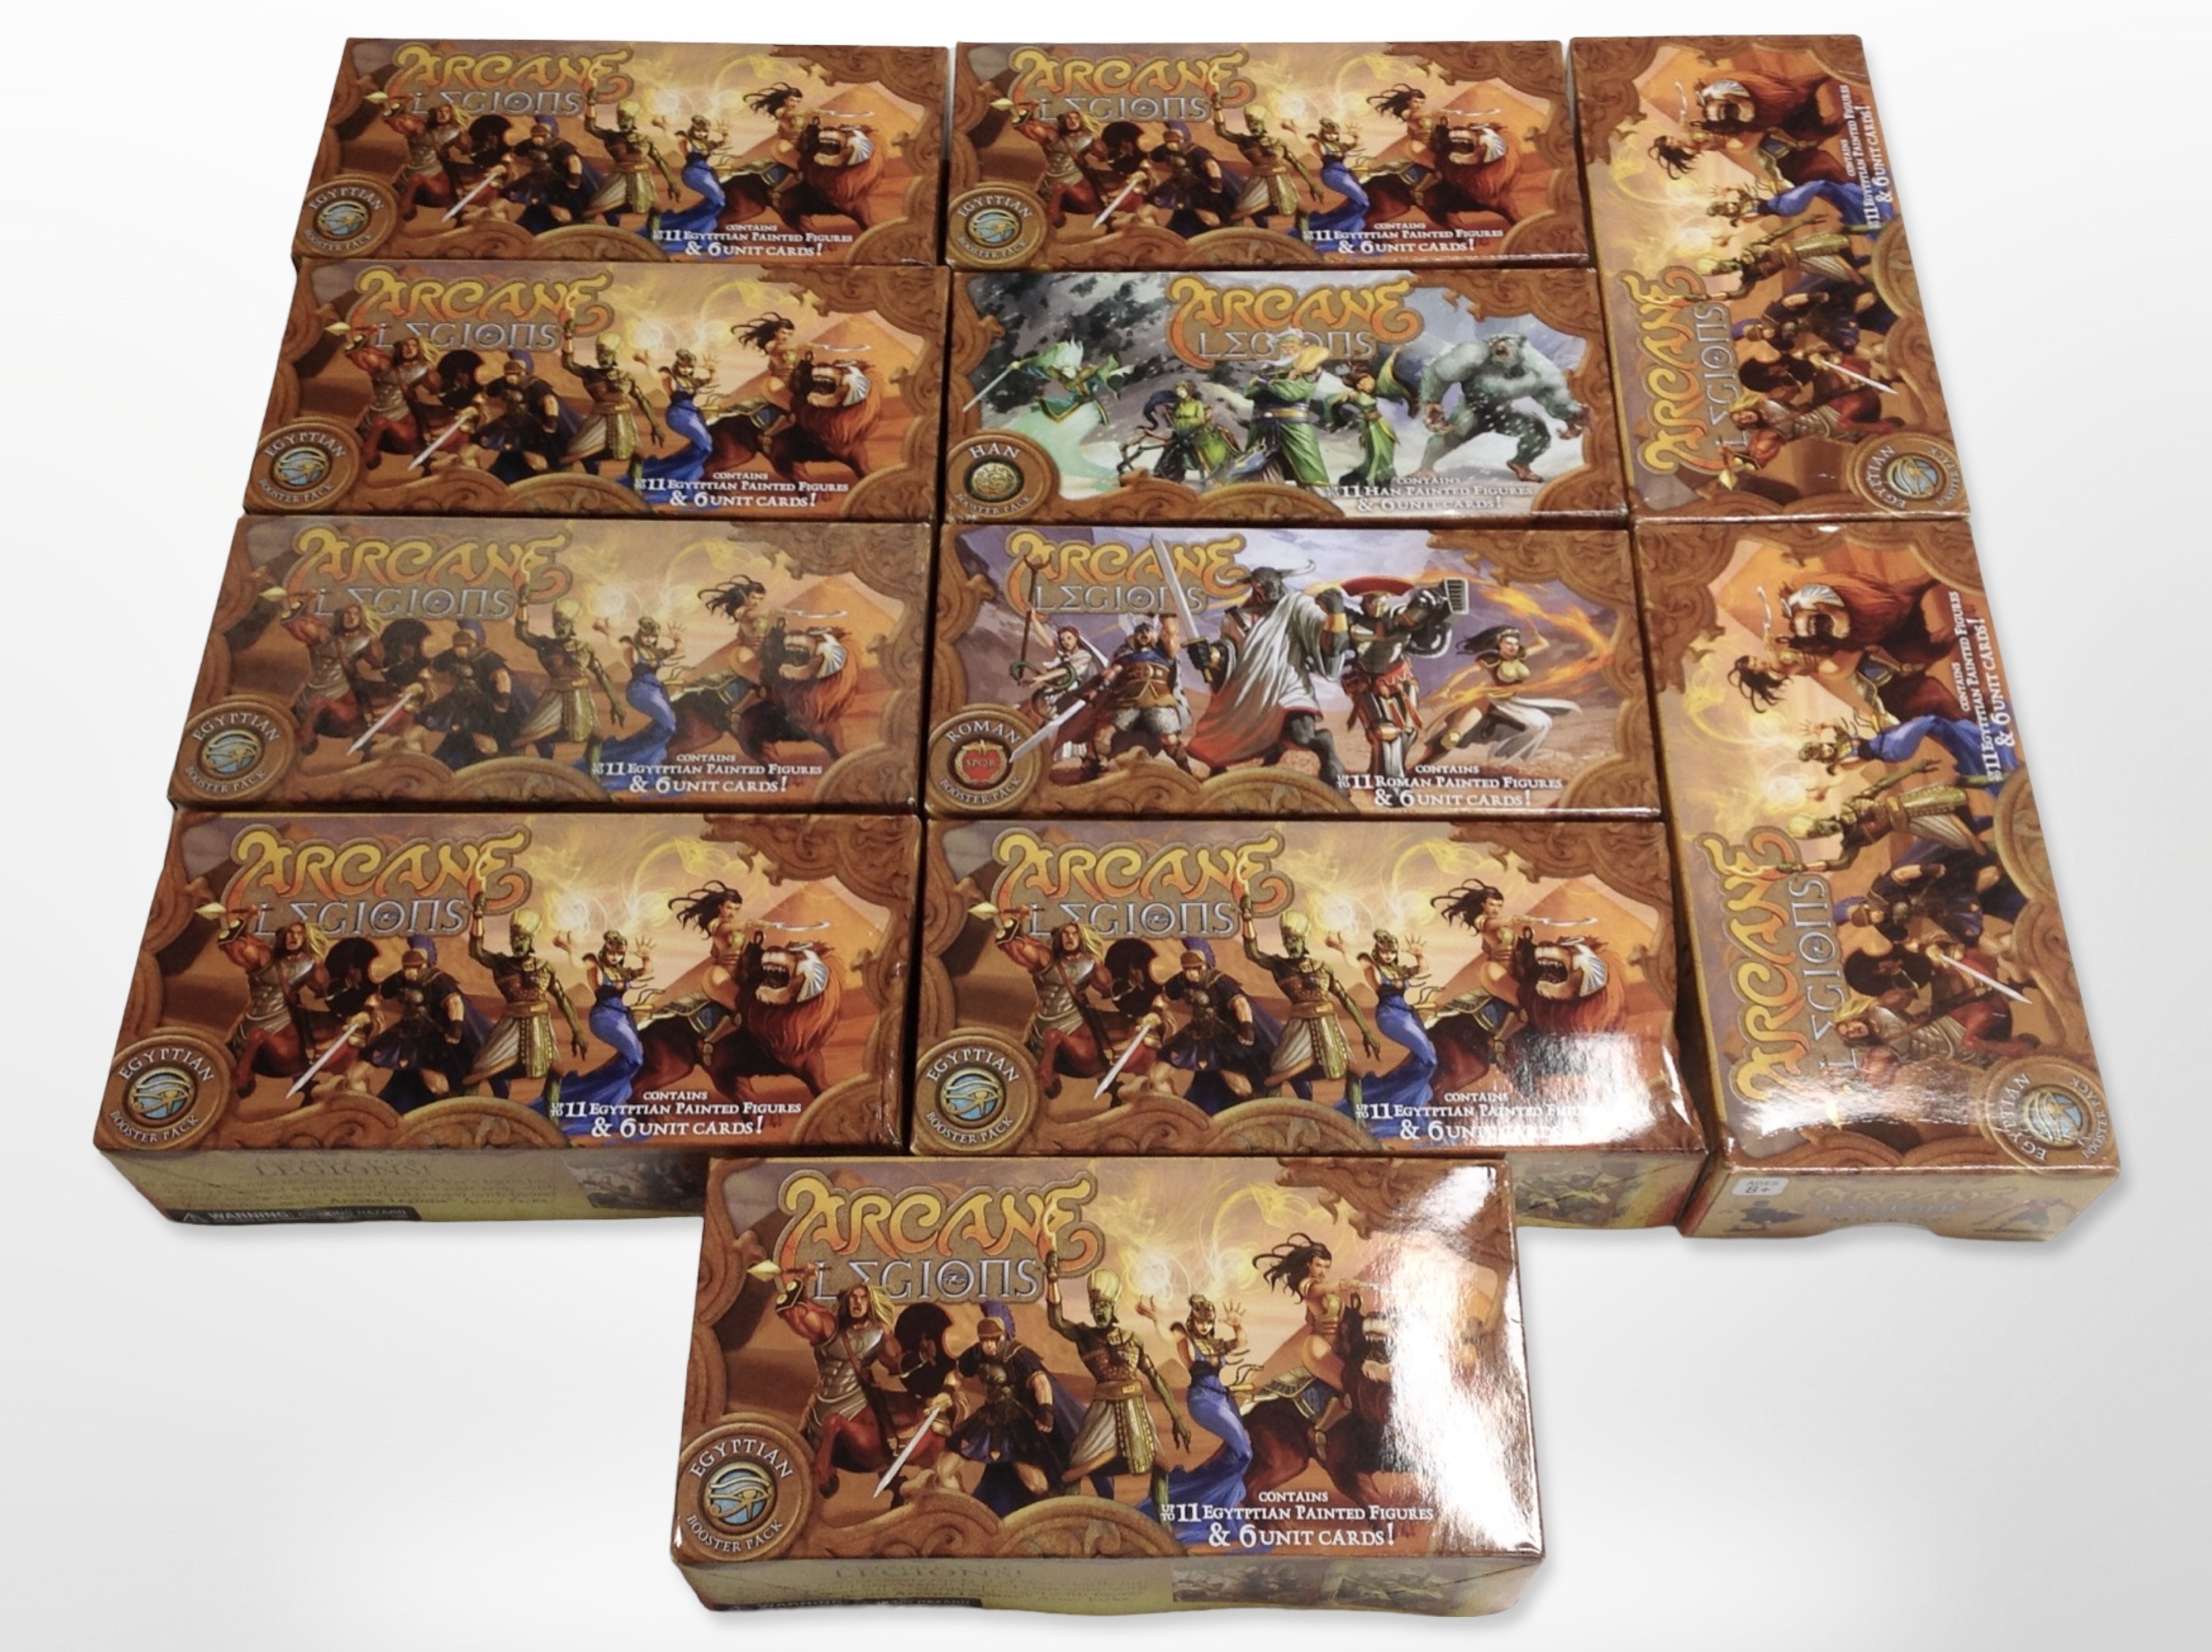 11 Arcane Legions miniatures booster packs containing figures and cards, all Egyptians.